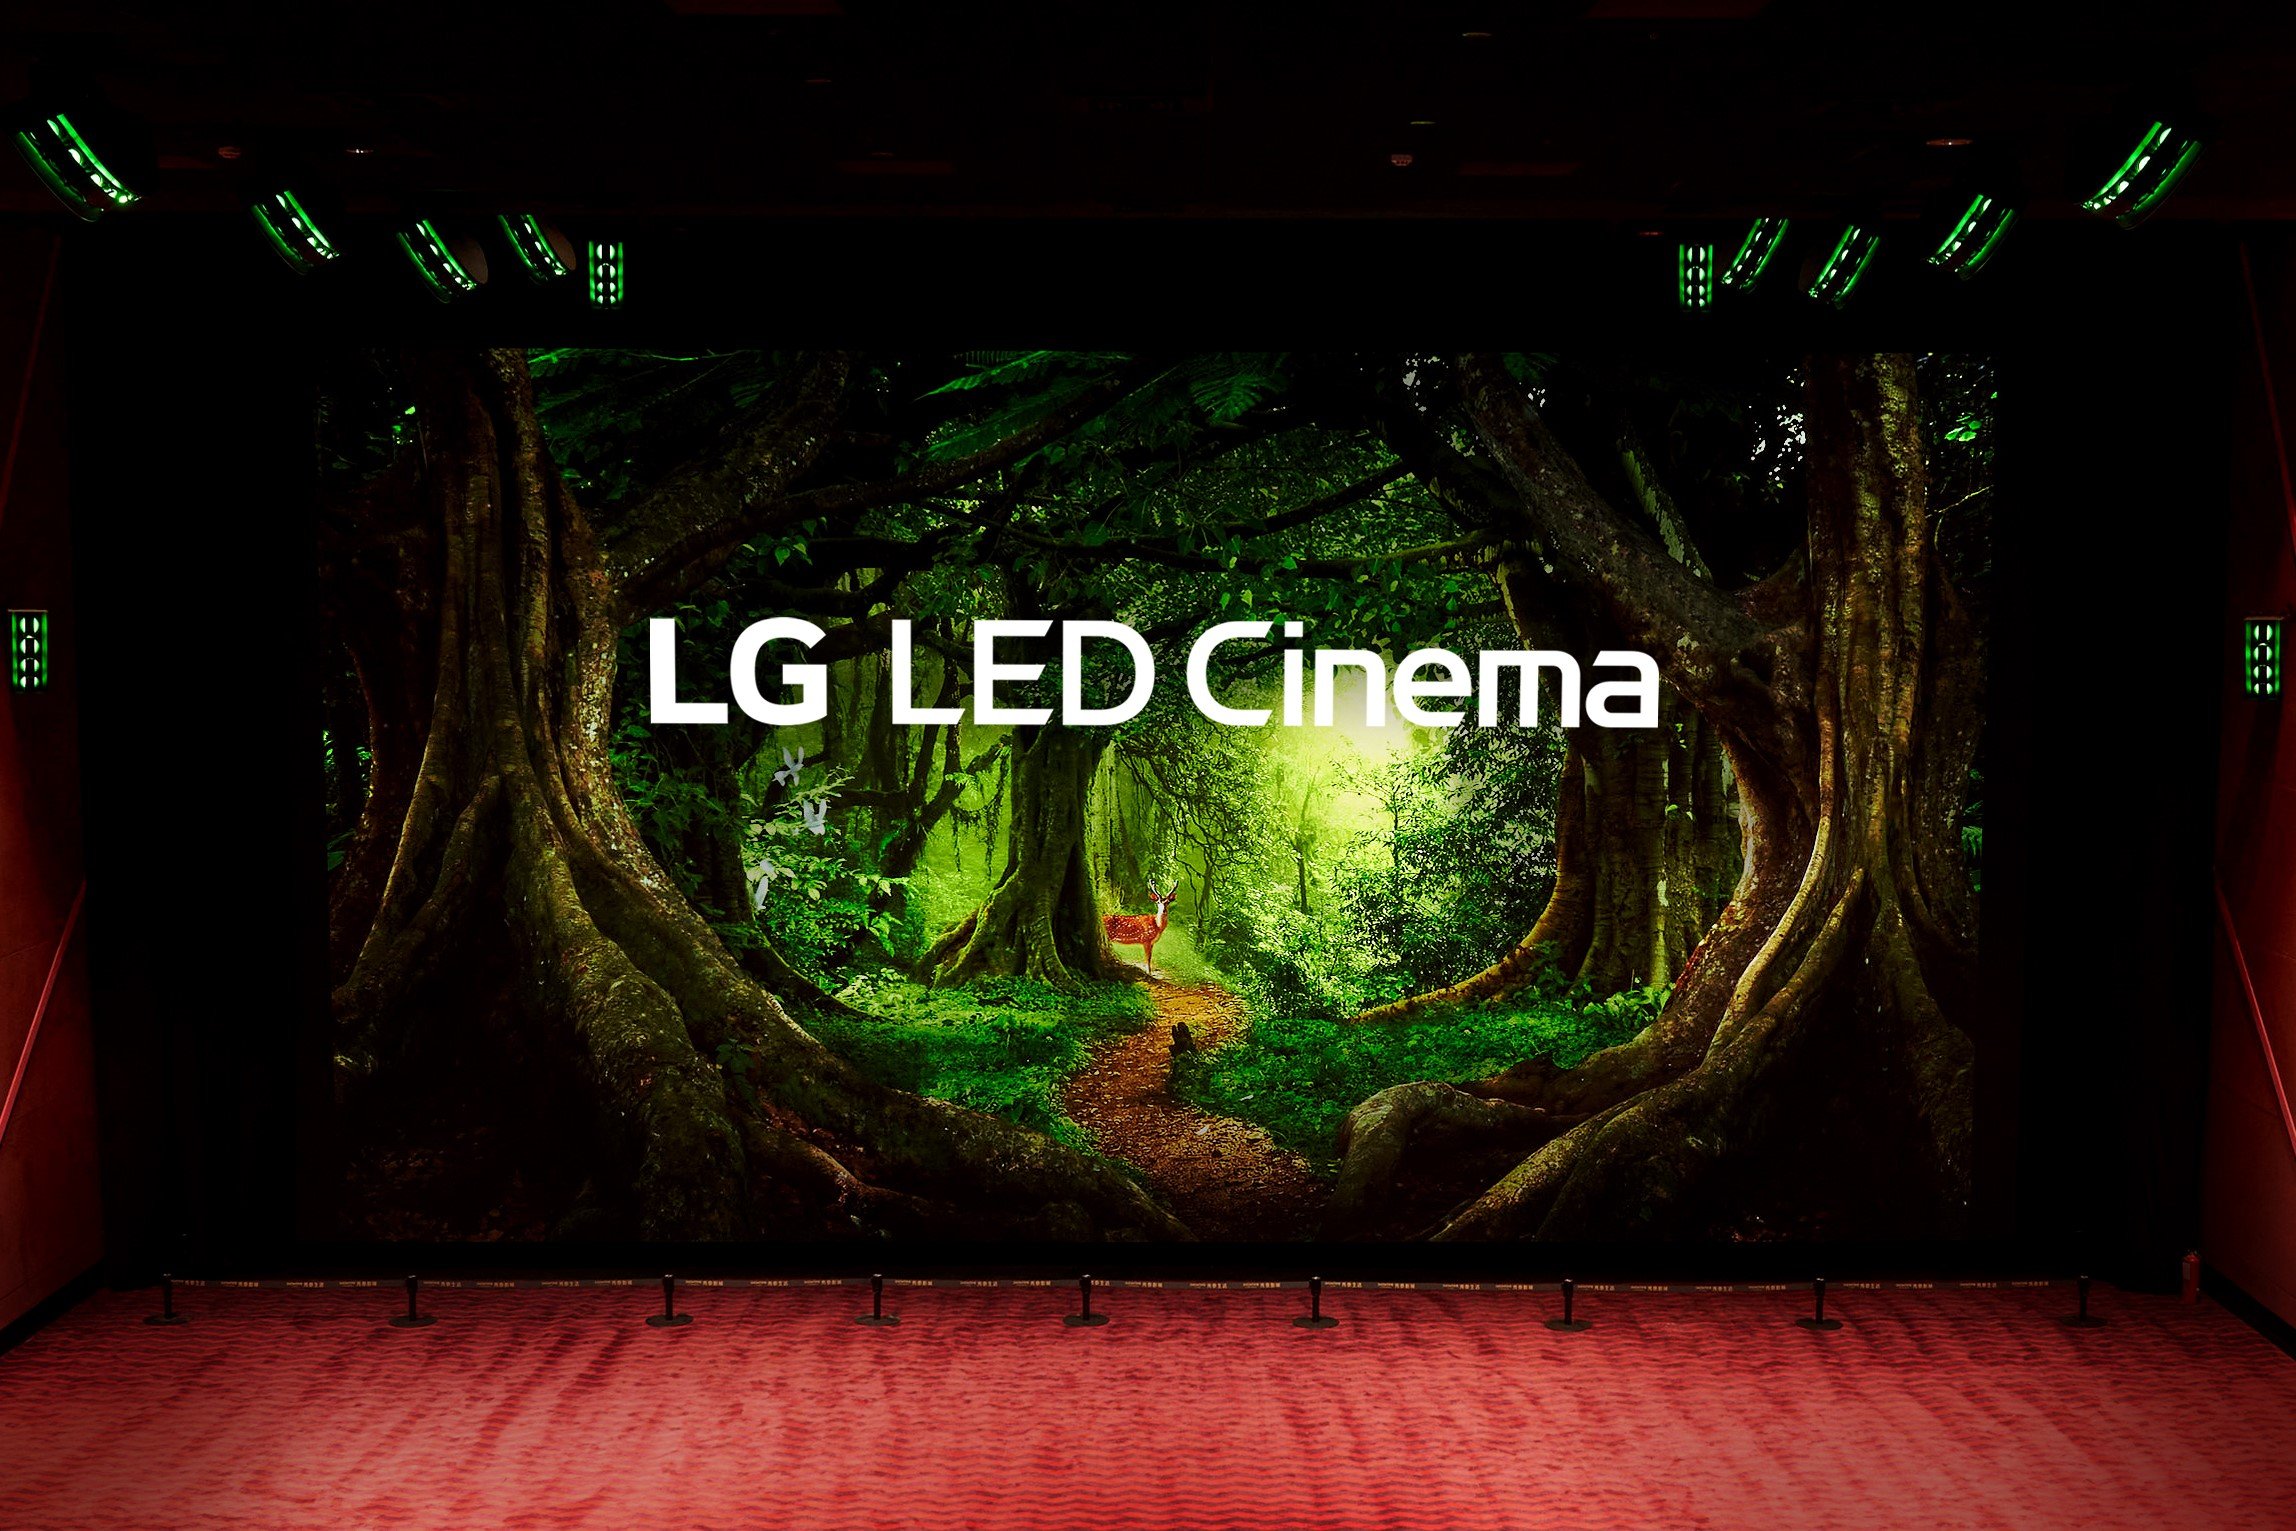 LG LED Cinema Display 01  Could LG LED Cinema Display Technology Replace Projectors?